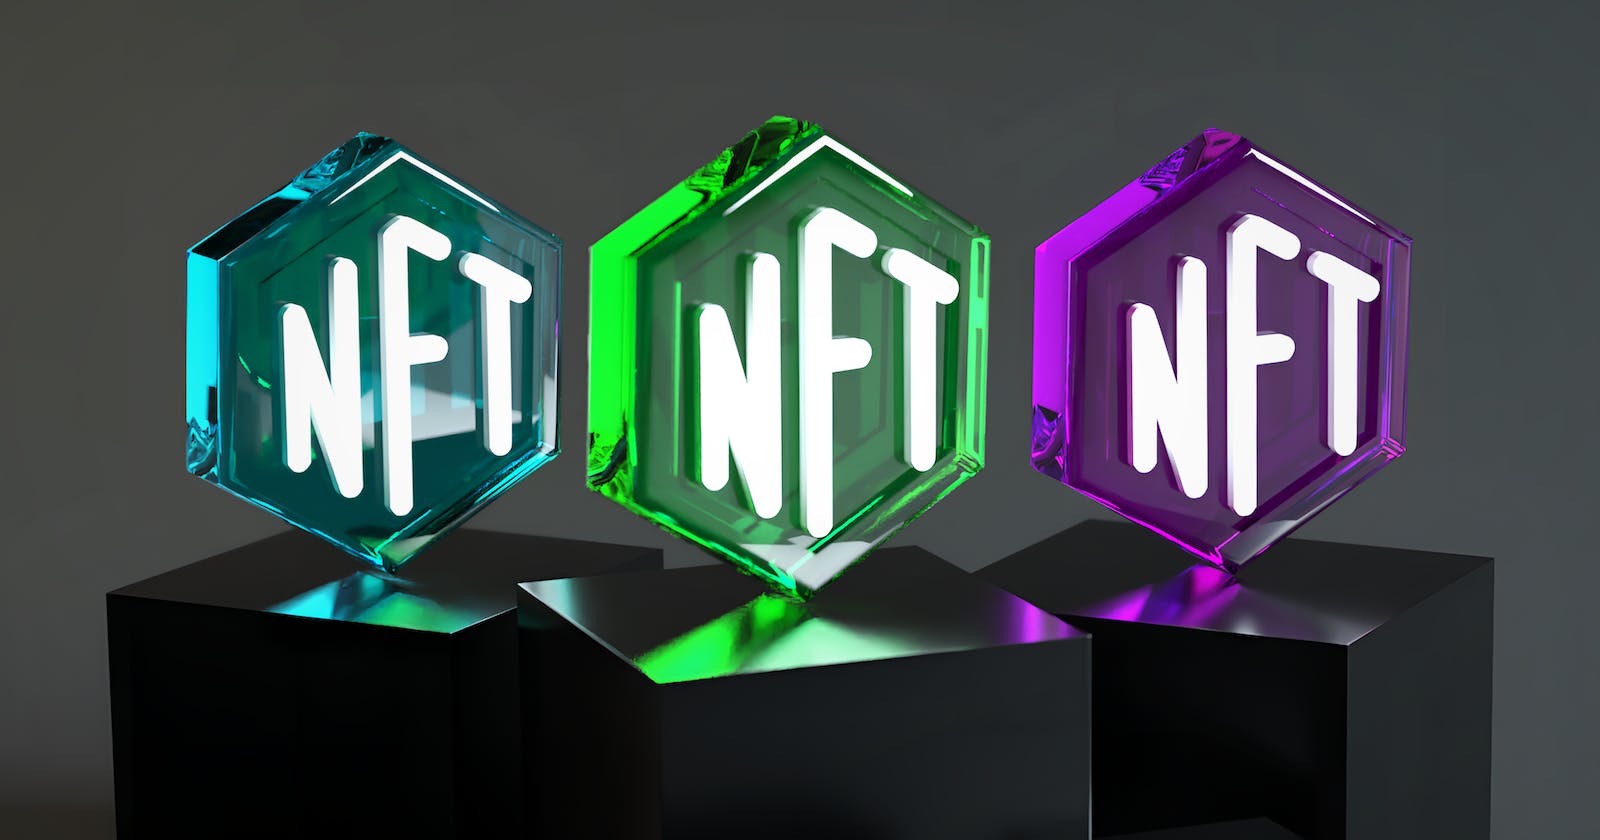 The Ultimate NFTs Masterclass - All you need to know about NFTs with special bonus content